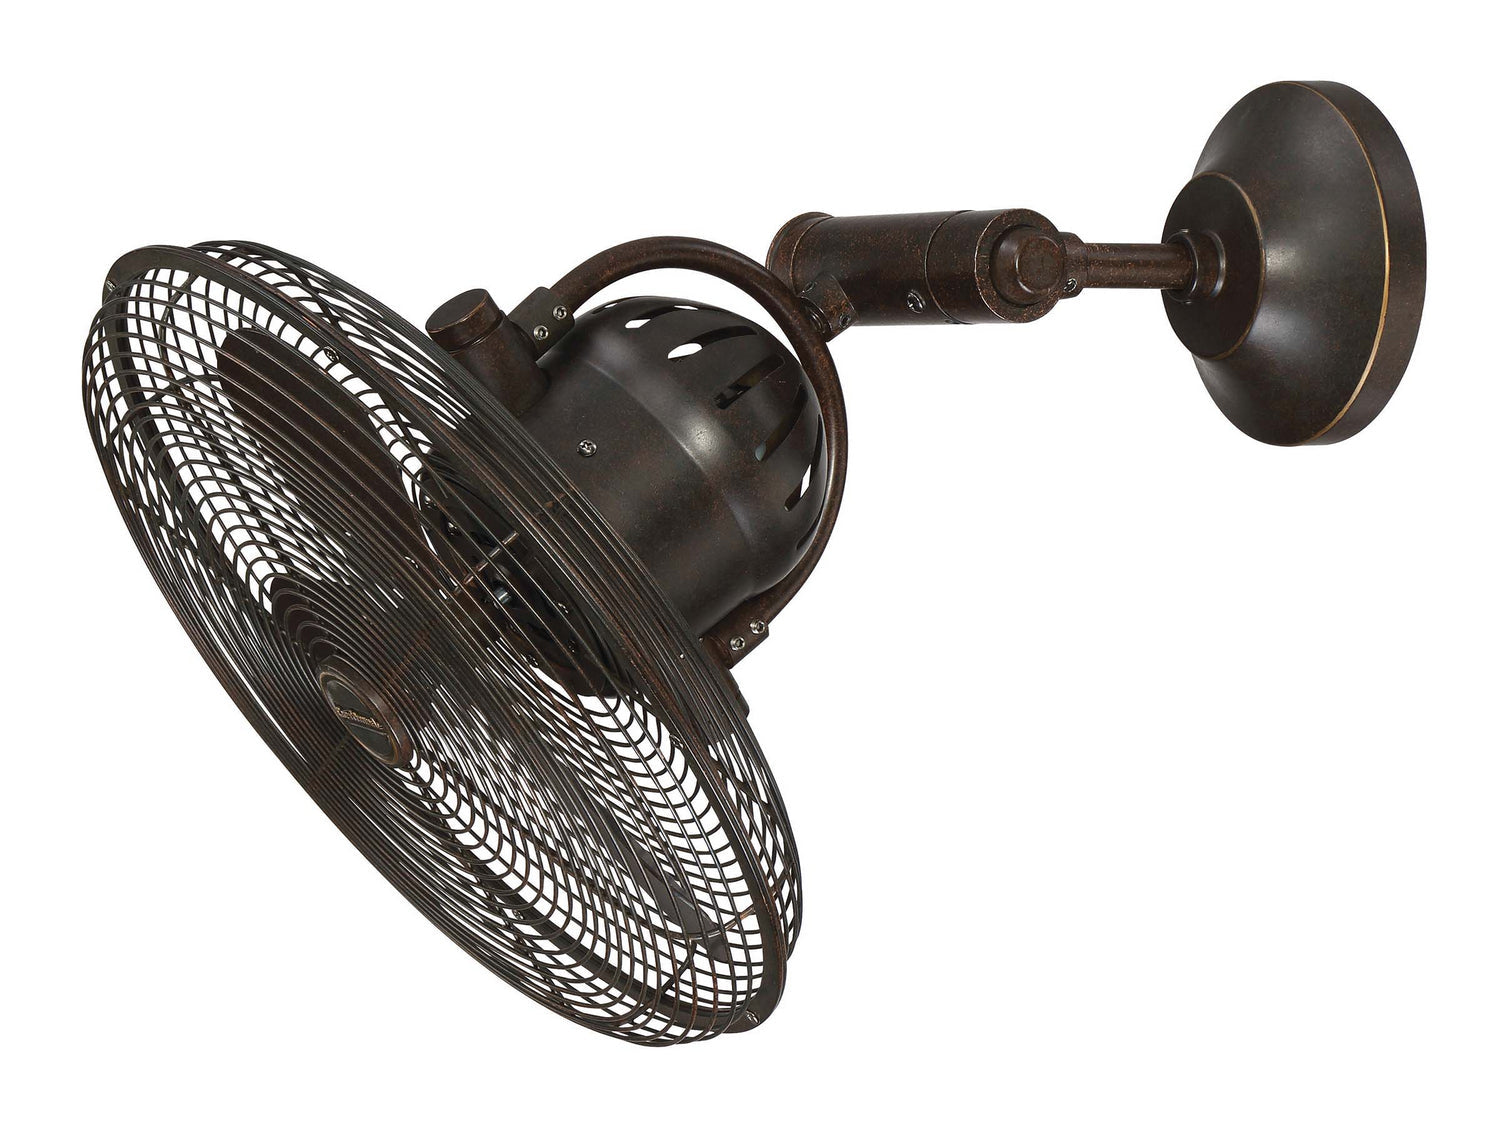 Craftmade Bellows IV Indoor/Outdoor BW414AG3 Ceiling Fan 14 - Aged Bronze Textured, Aged Bronze/Aged Bronze/